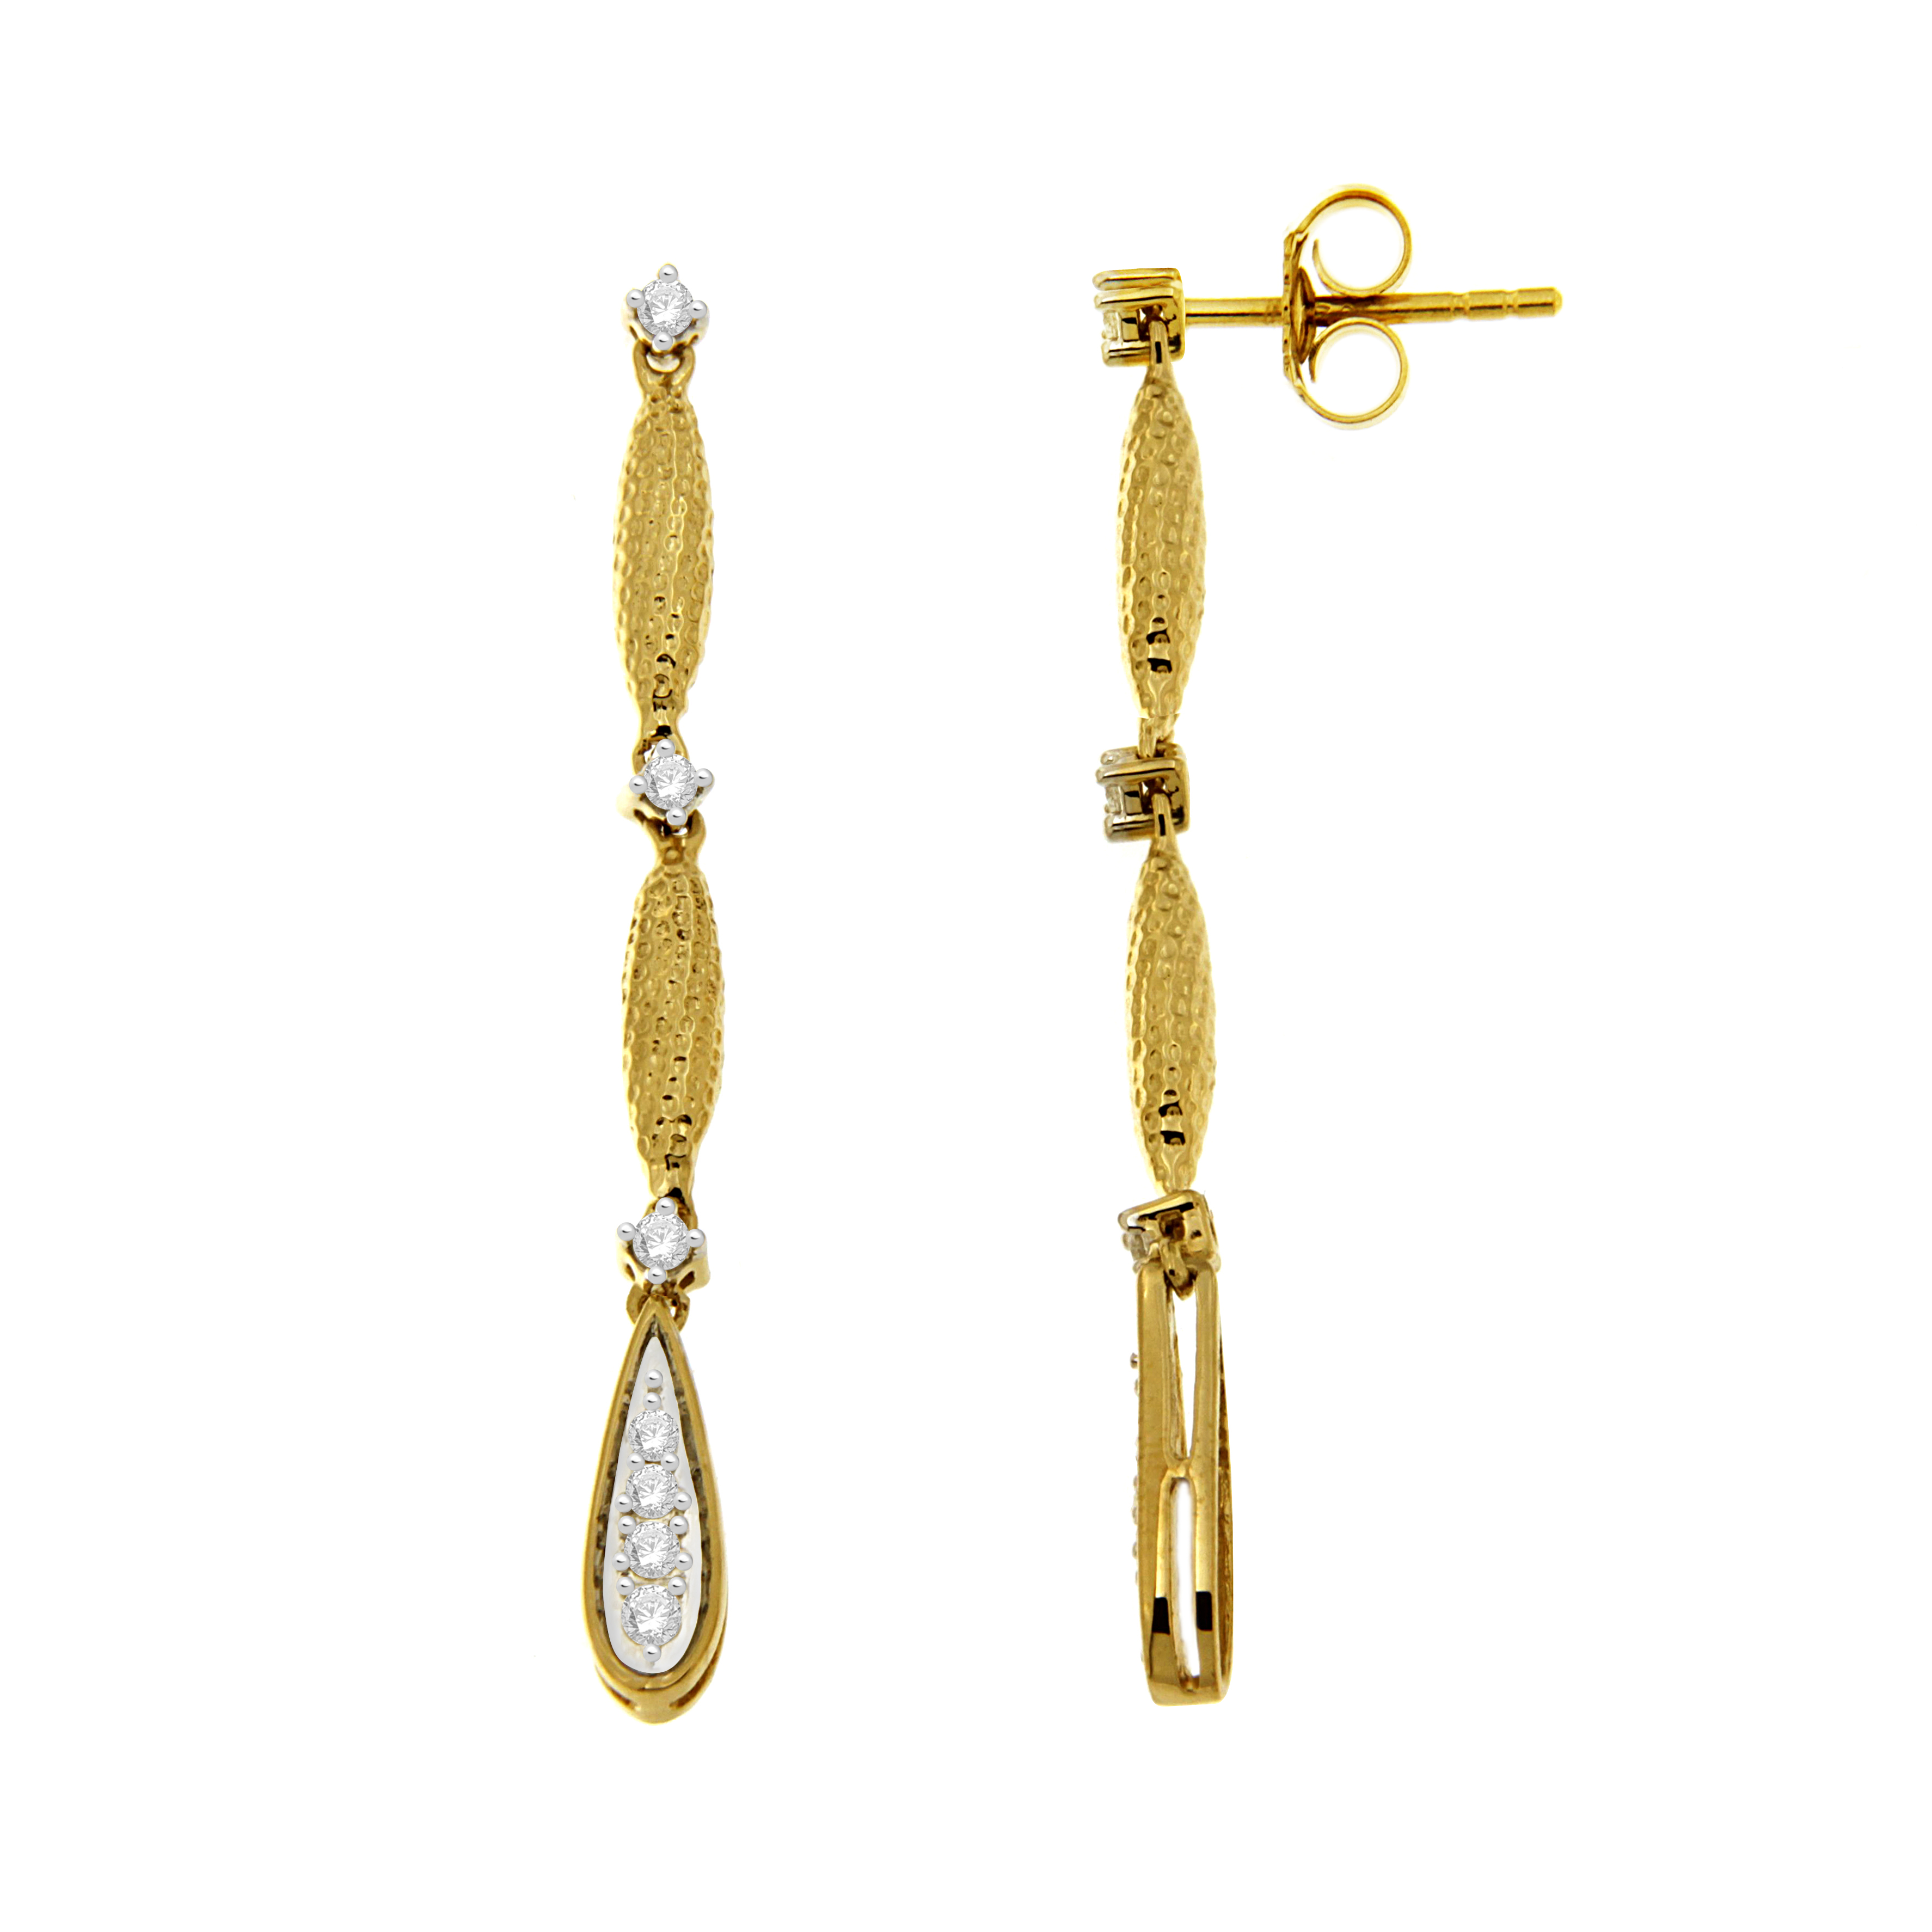 Gold over Silver 0.25 CTW 3 Drop Earrings